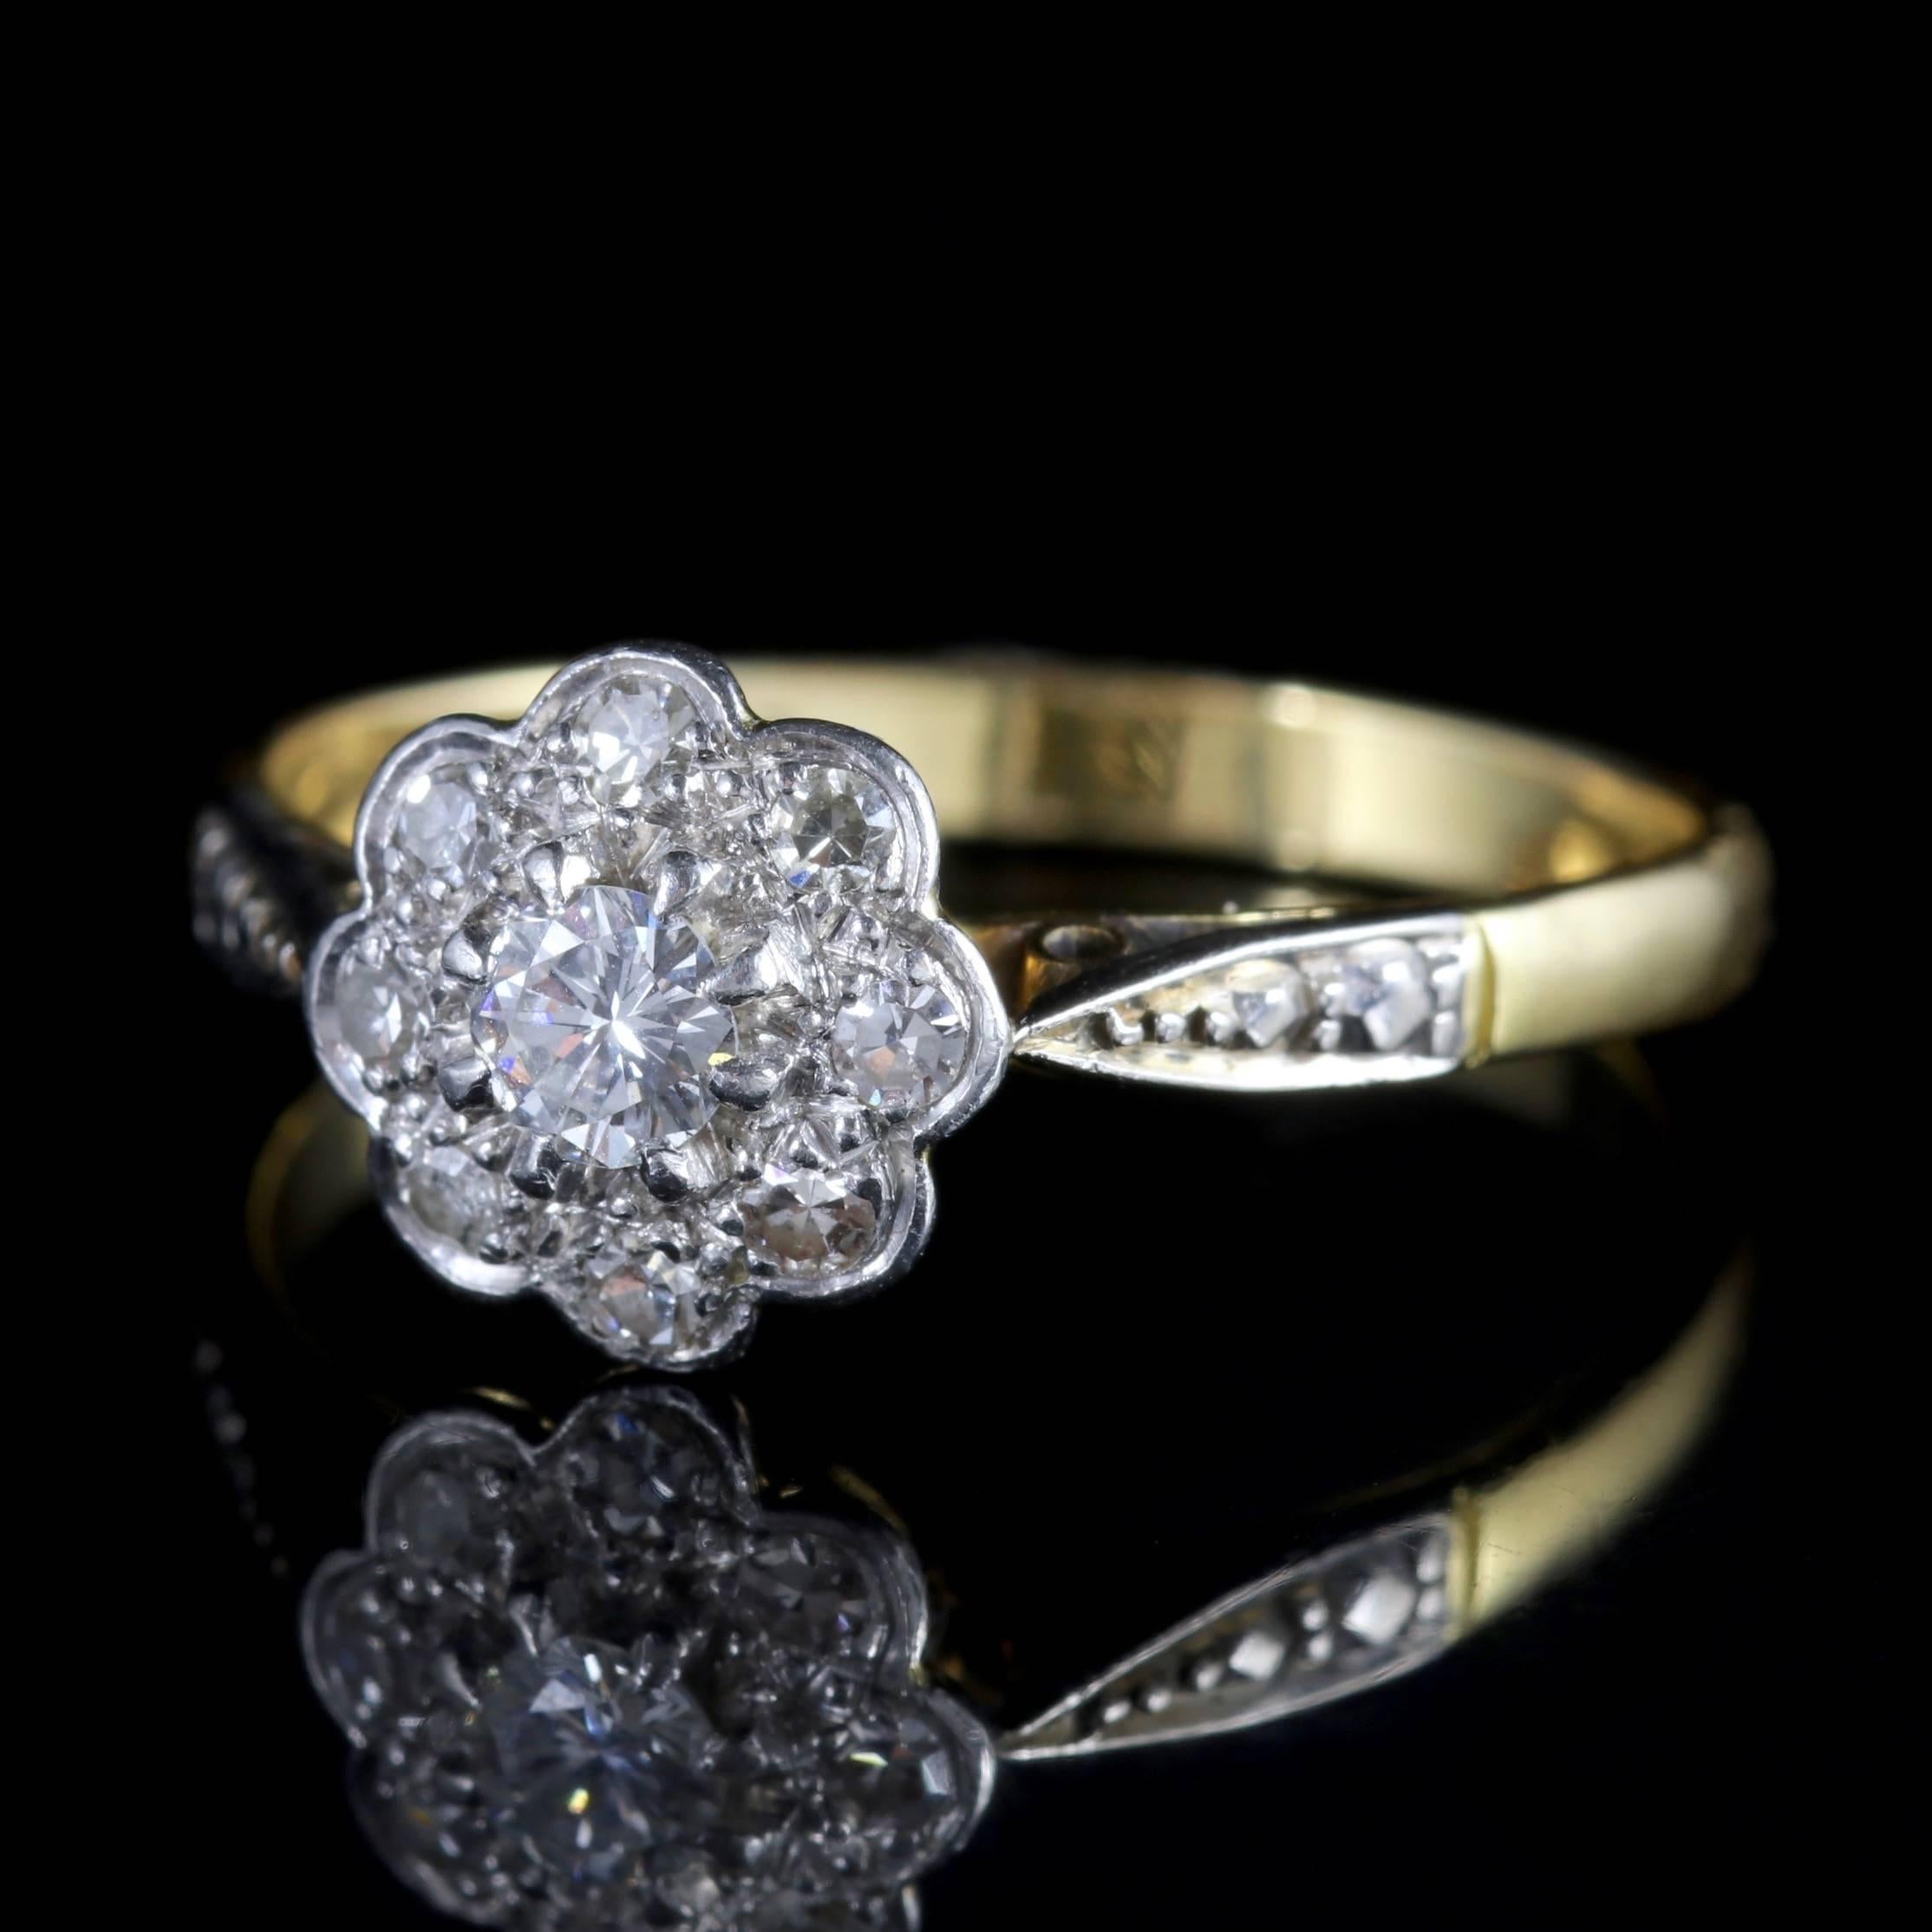 To read more please click continue reading below-

This fabulous antique 18ct Gold Diamond cluster Ring is Edwardian, Circa 1915.

The ring boasts a cluster of Diamonds set out in a beautiful daisy design. 

Diamonds sparkle continuously and